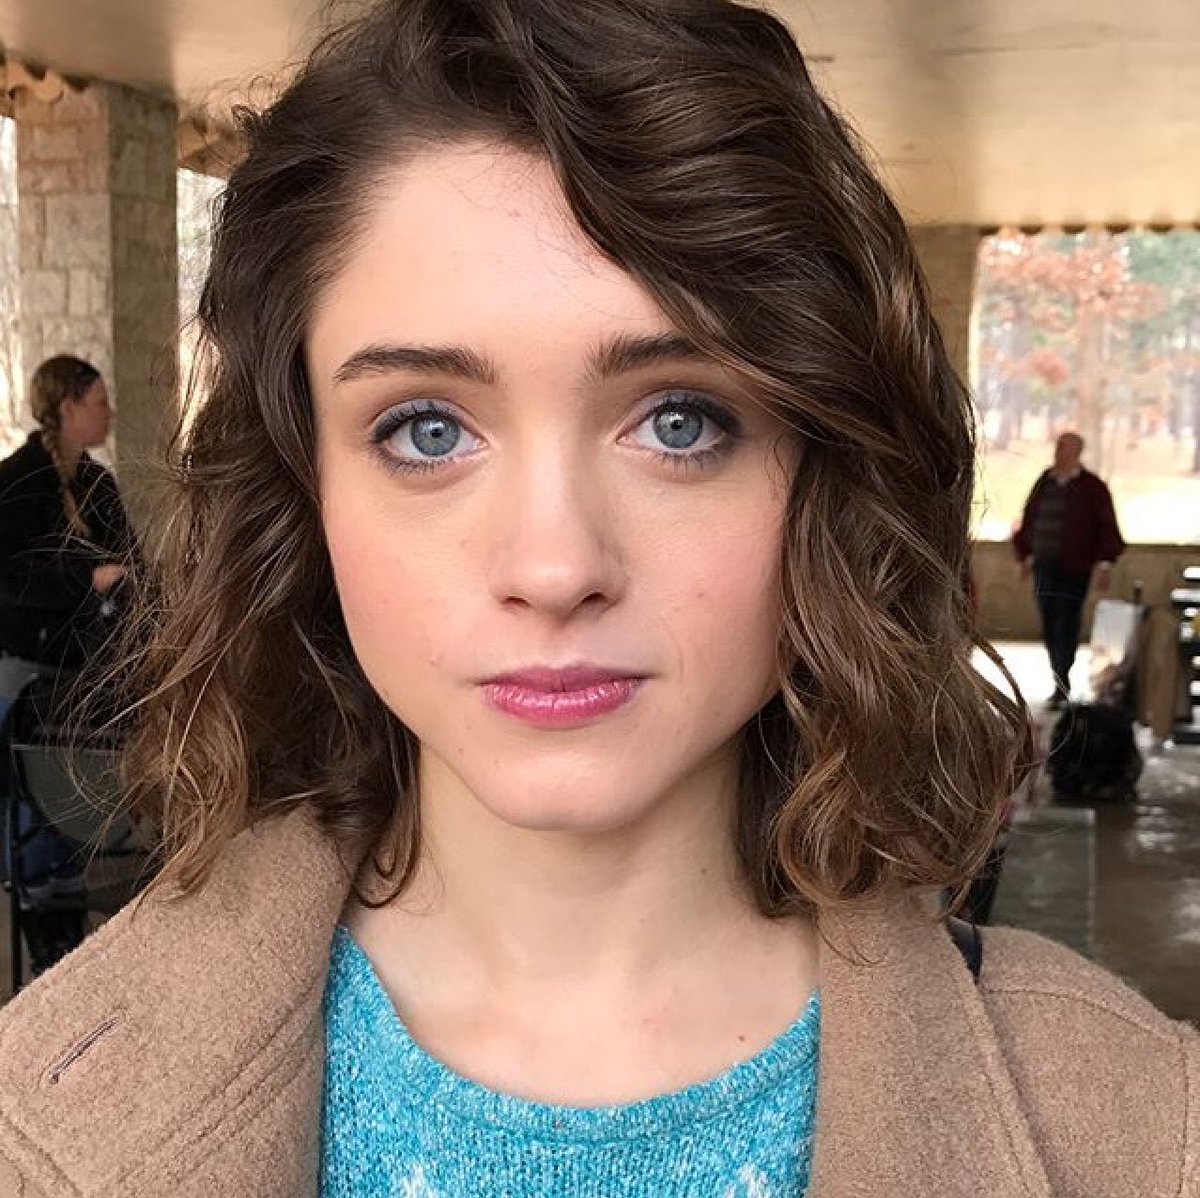 Best Of Natalia Dyer Fan Account On Twitter The Makeup Artist From St Shared This Bts Pic Of Natalia In Costume She Provided A List Of Her Hair And Makeup Products